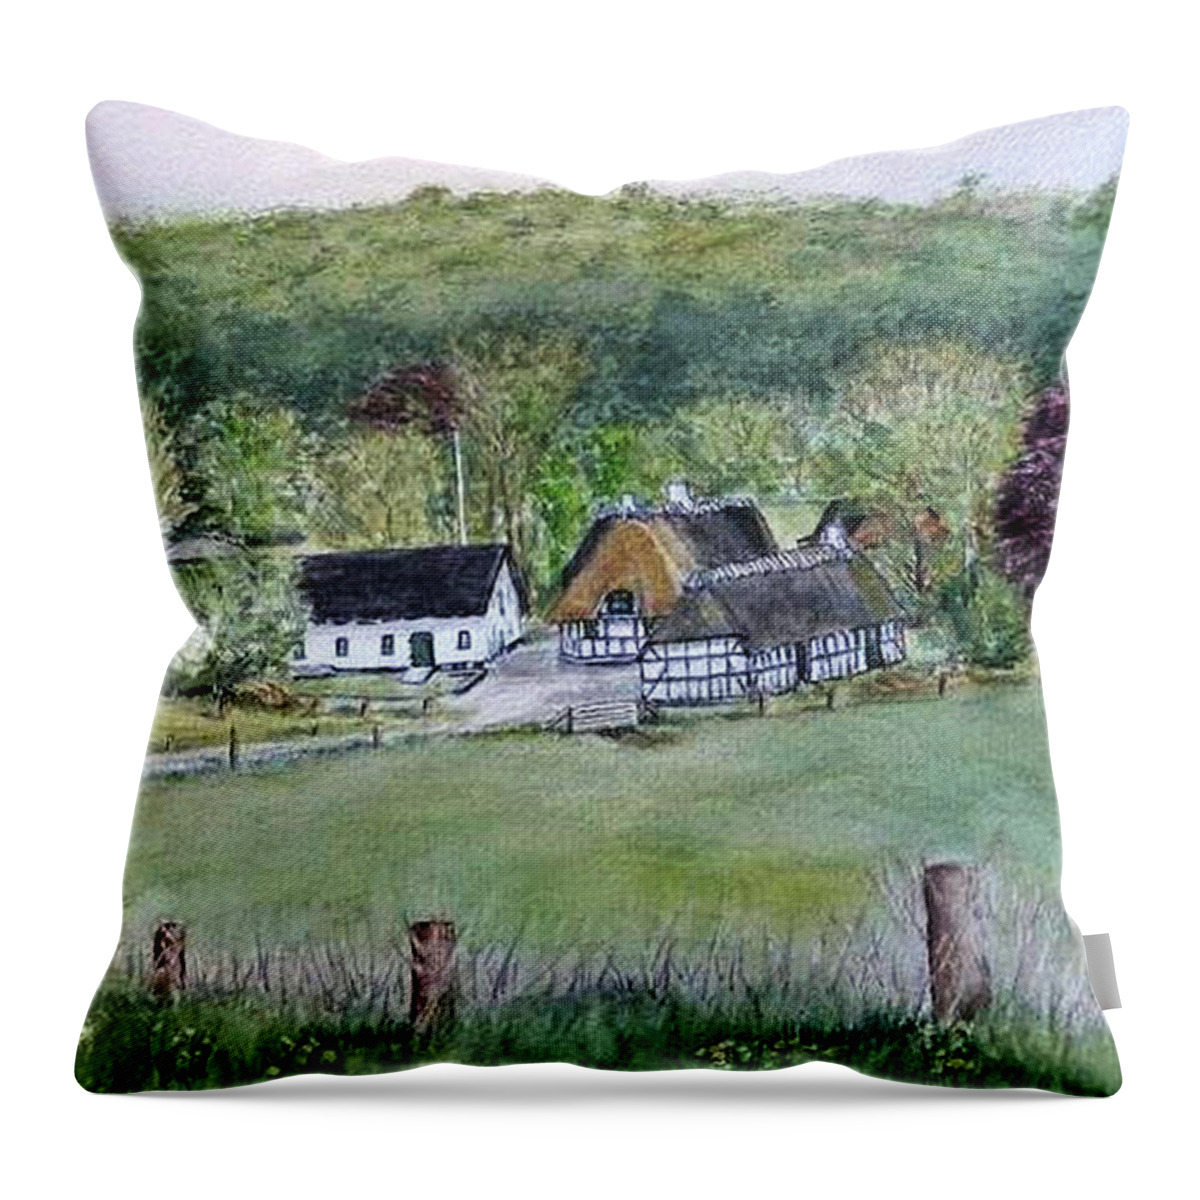 Landscape In Denmark Throw Pillow featuring the painting Old Danish Farm House by Kelly Mills